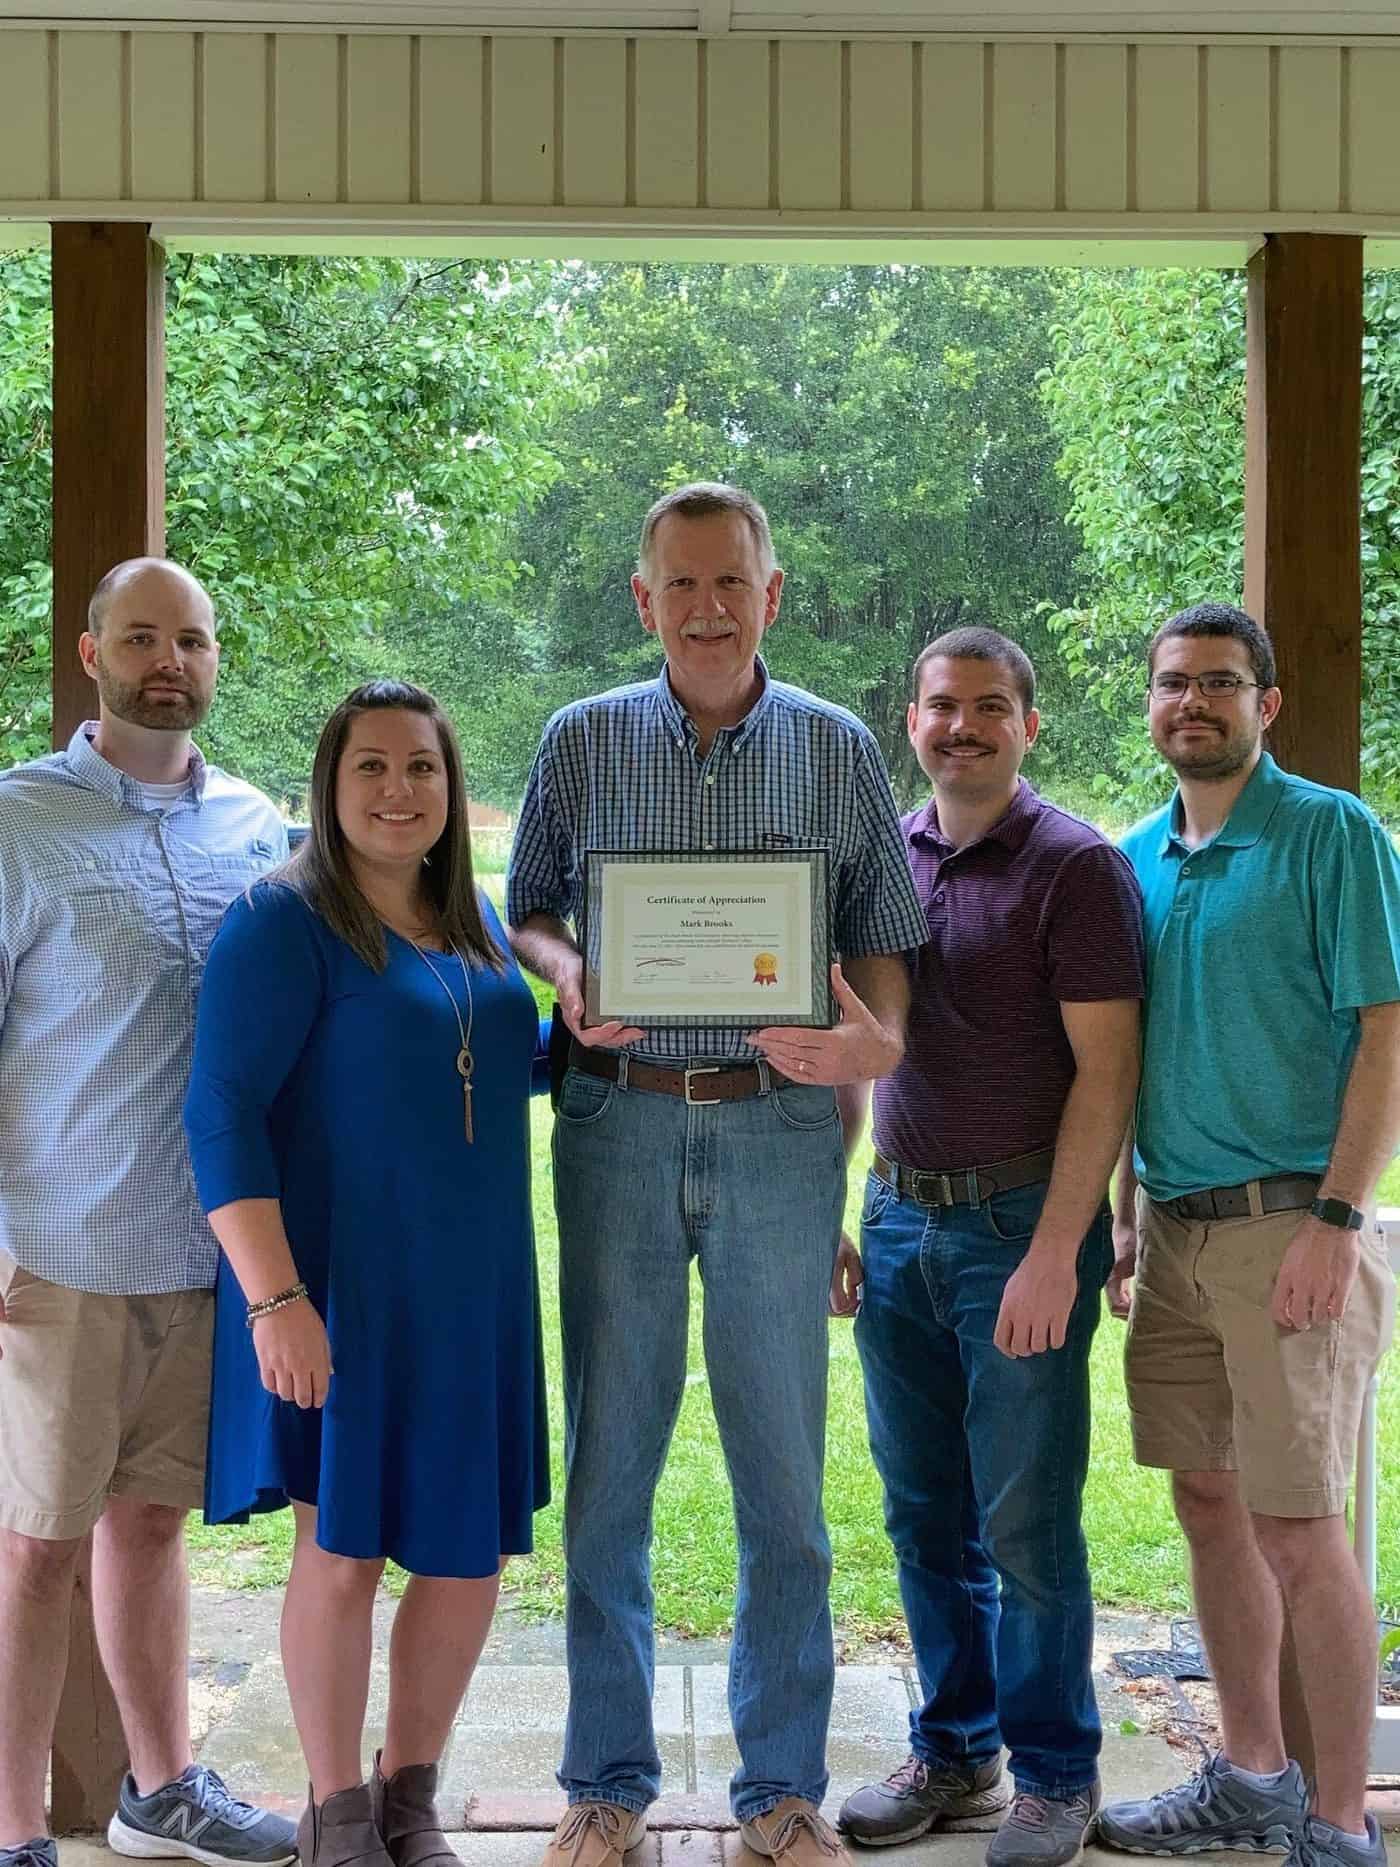 Mark Brooks (center) is shown above with his SGTC Foundation Scholarship certificate that was presented to him by his children after they established the Mark Brooks Scholarship for aviation maintenance students as a retirement gift. Shown (l to r) are Ben and Beth Brooks Wisham, Mark Brooks, Matthew Brooks and John Brooks.